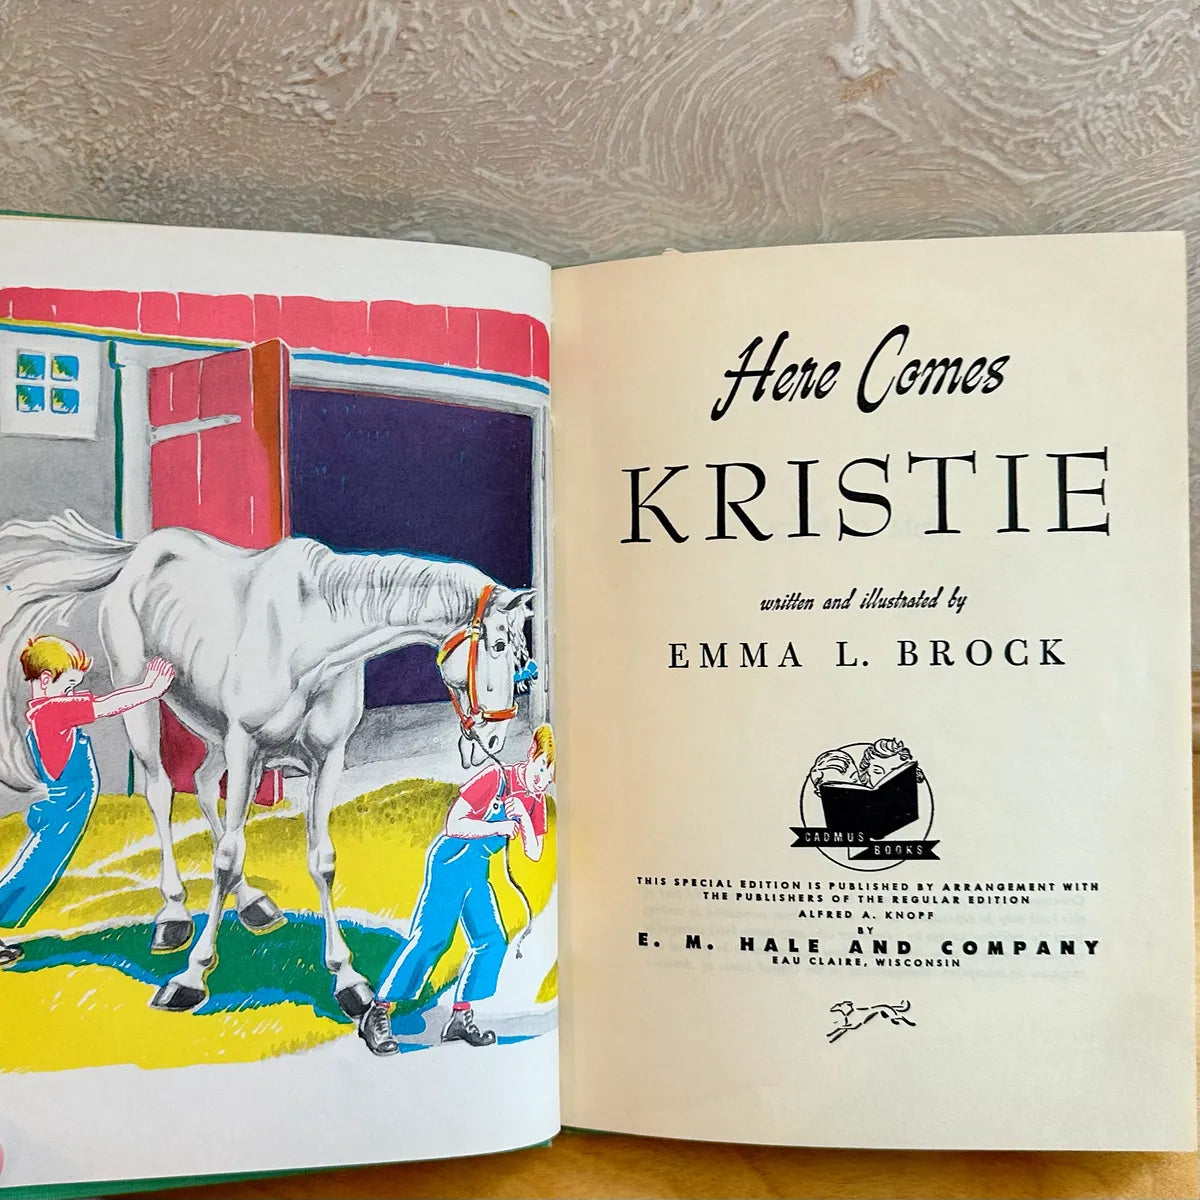 HERE COMES KRISTIE (1942) by Emma L. Brock